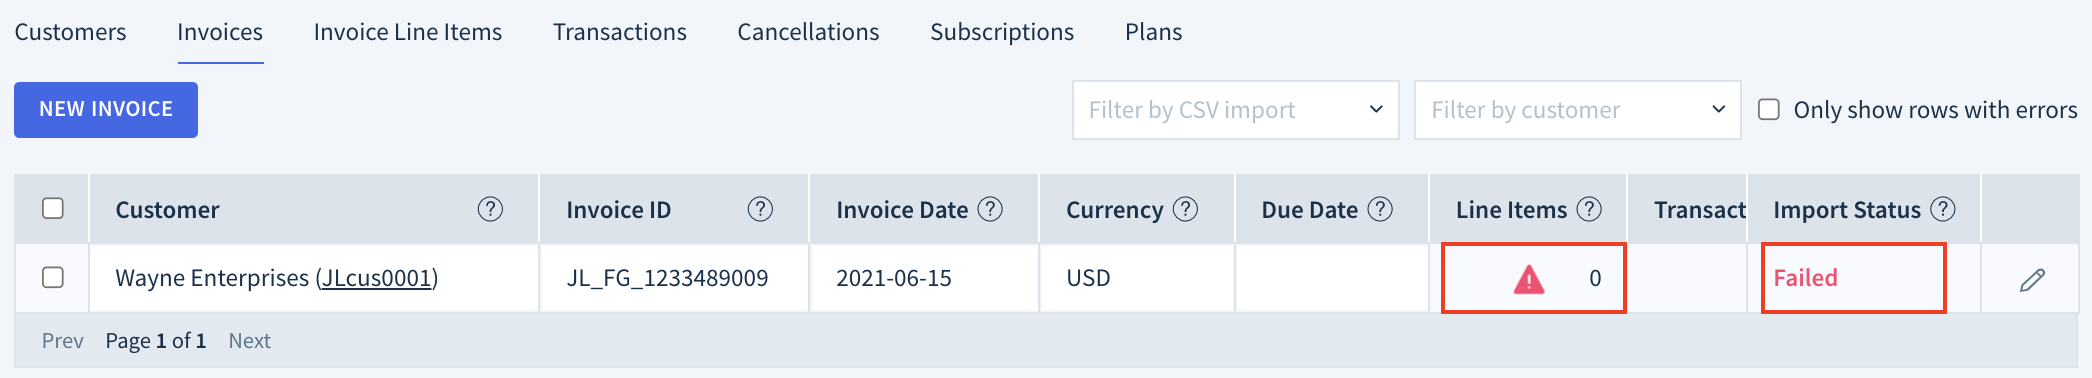 Screenshot of the Invoices table with one newly created invoice. The Line Items and Import Status fields show errors.